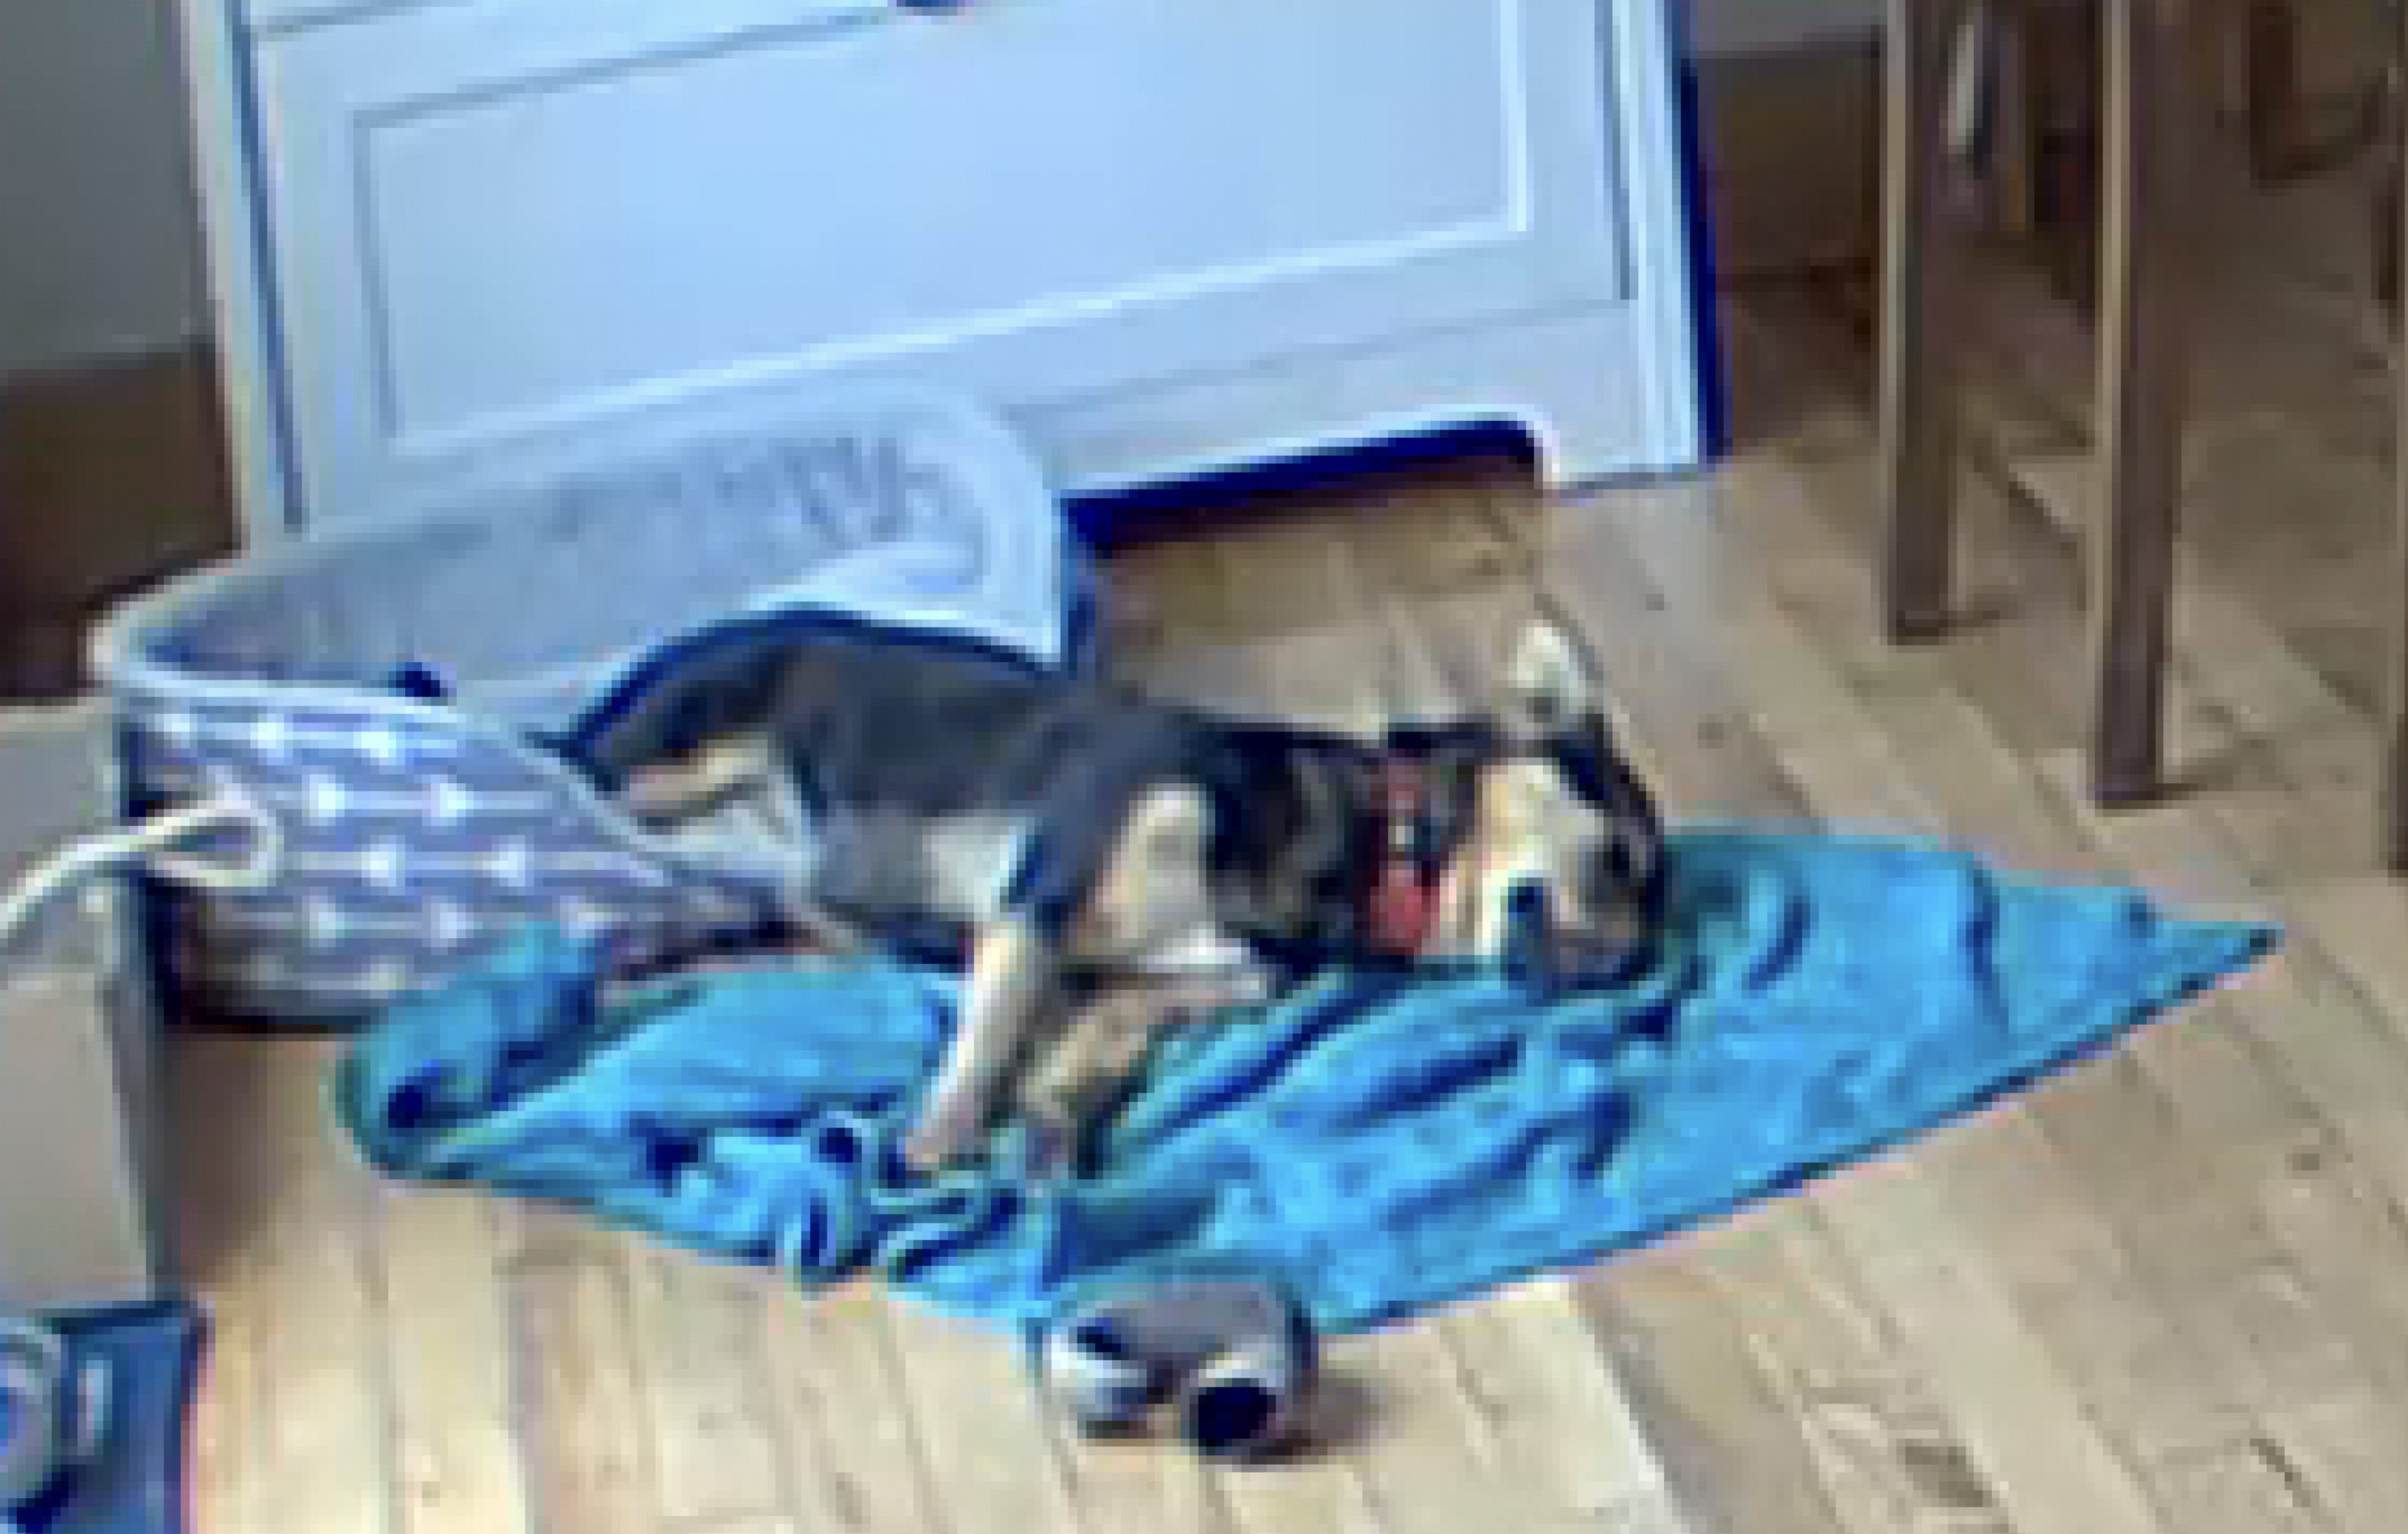 A fairly grainy quality photo from a Blink security camera heavily zoomed in on Cookie the puppy, lying on a blue towel that is next to her bed in the dining room, stretched out asleep. In front of Cookie is a naturally shed ram's horn